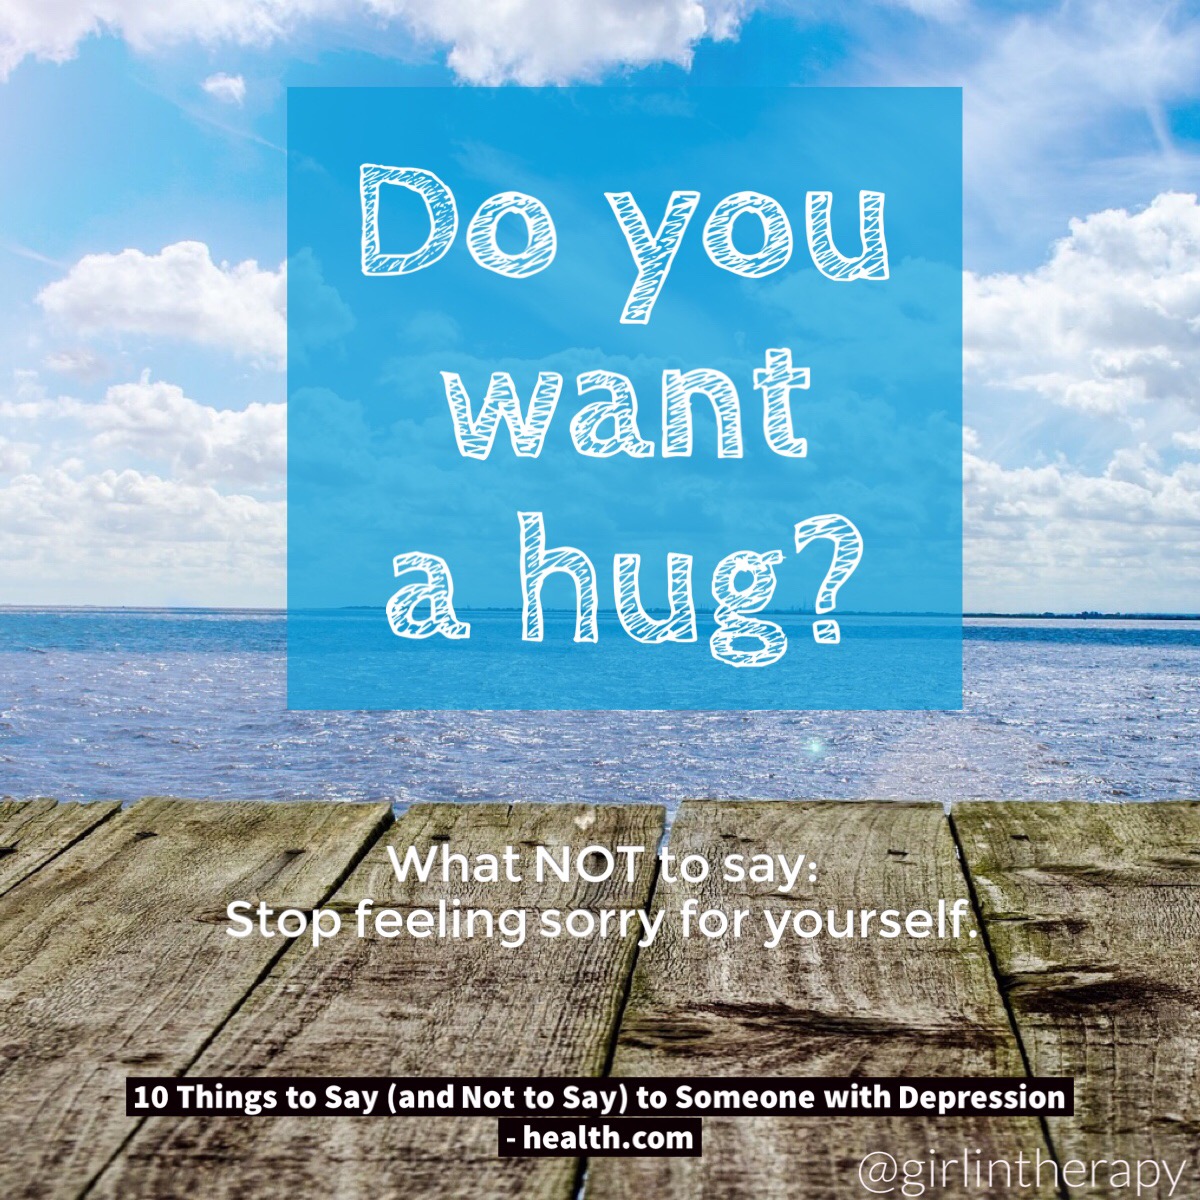 How to help someone in Depression - Do you want a hug